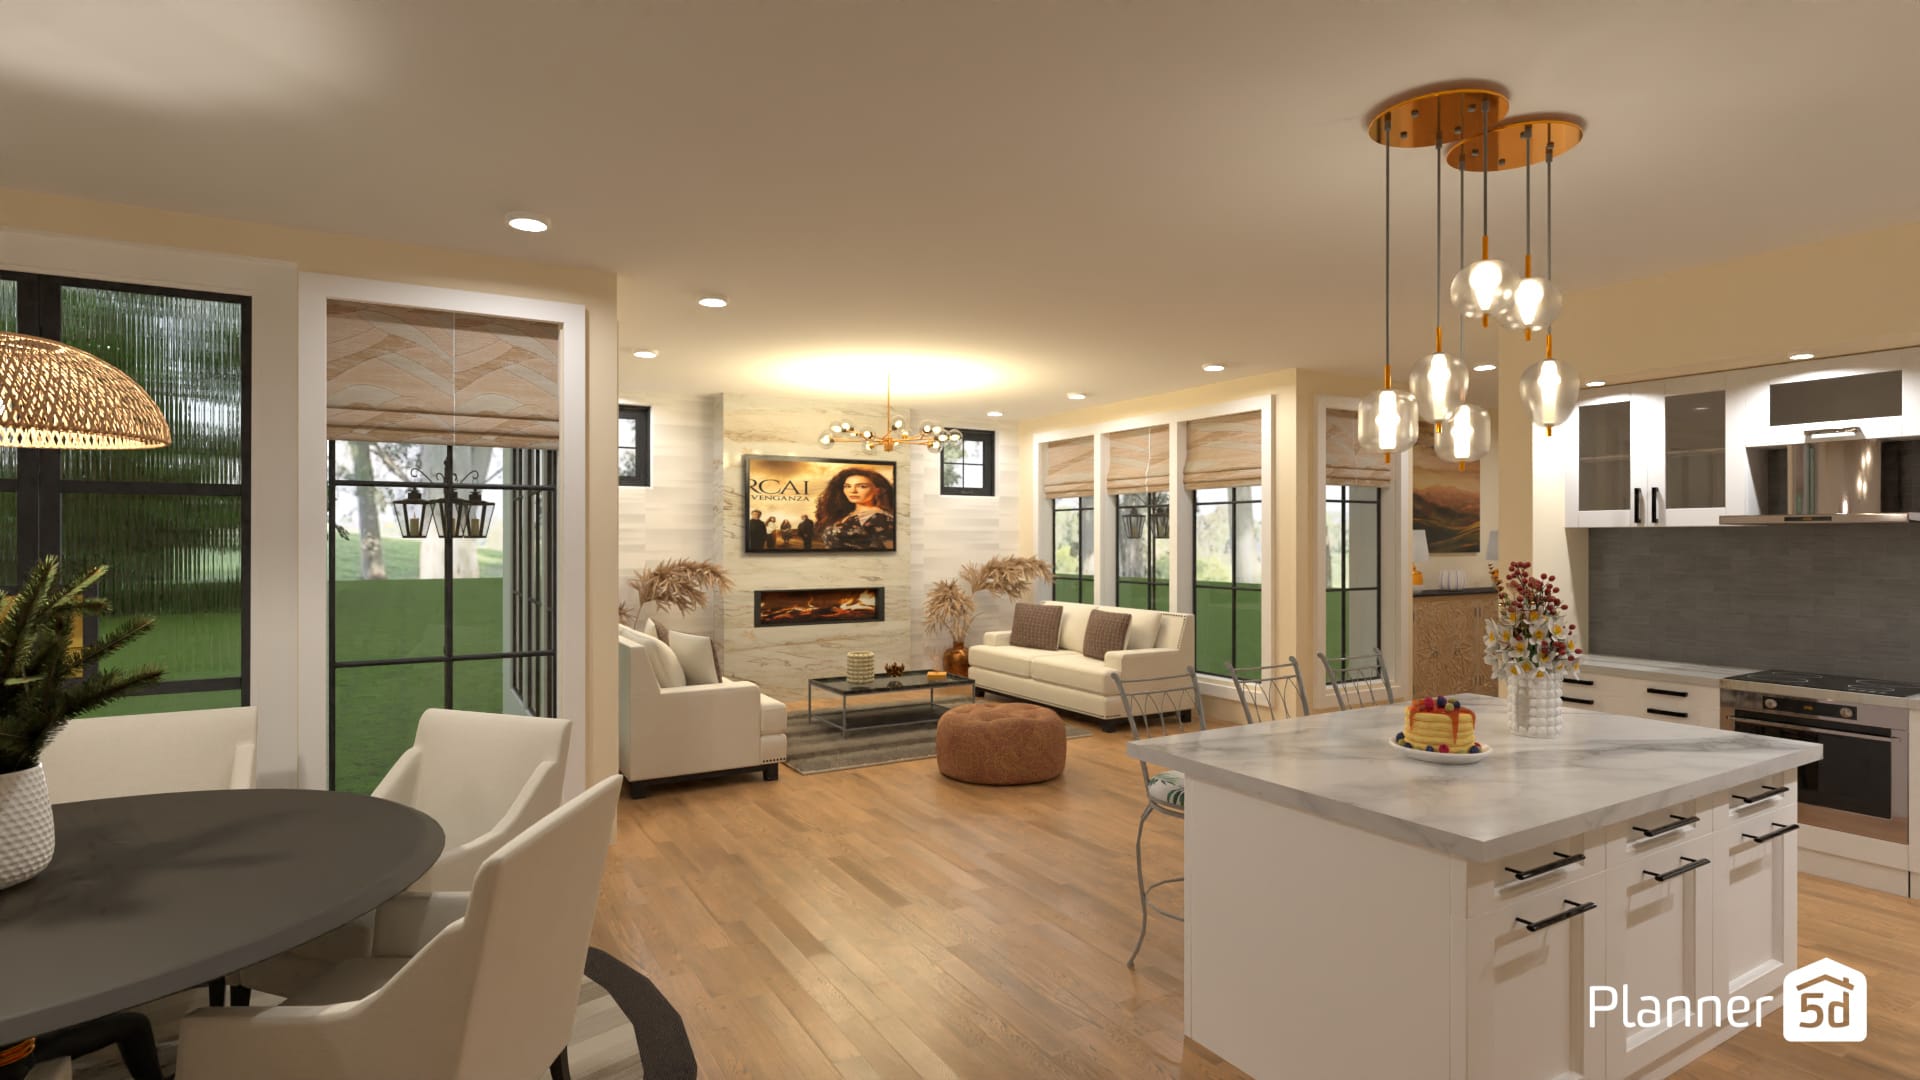 planner 5d's render of an open kitchen and a living room 